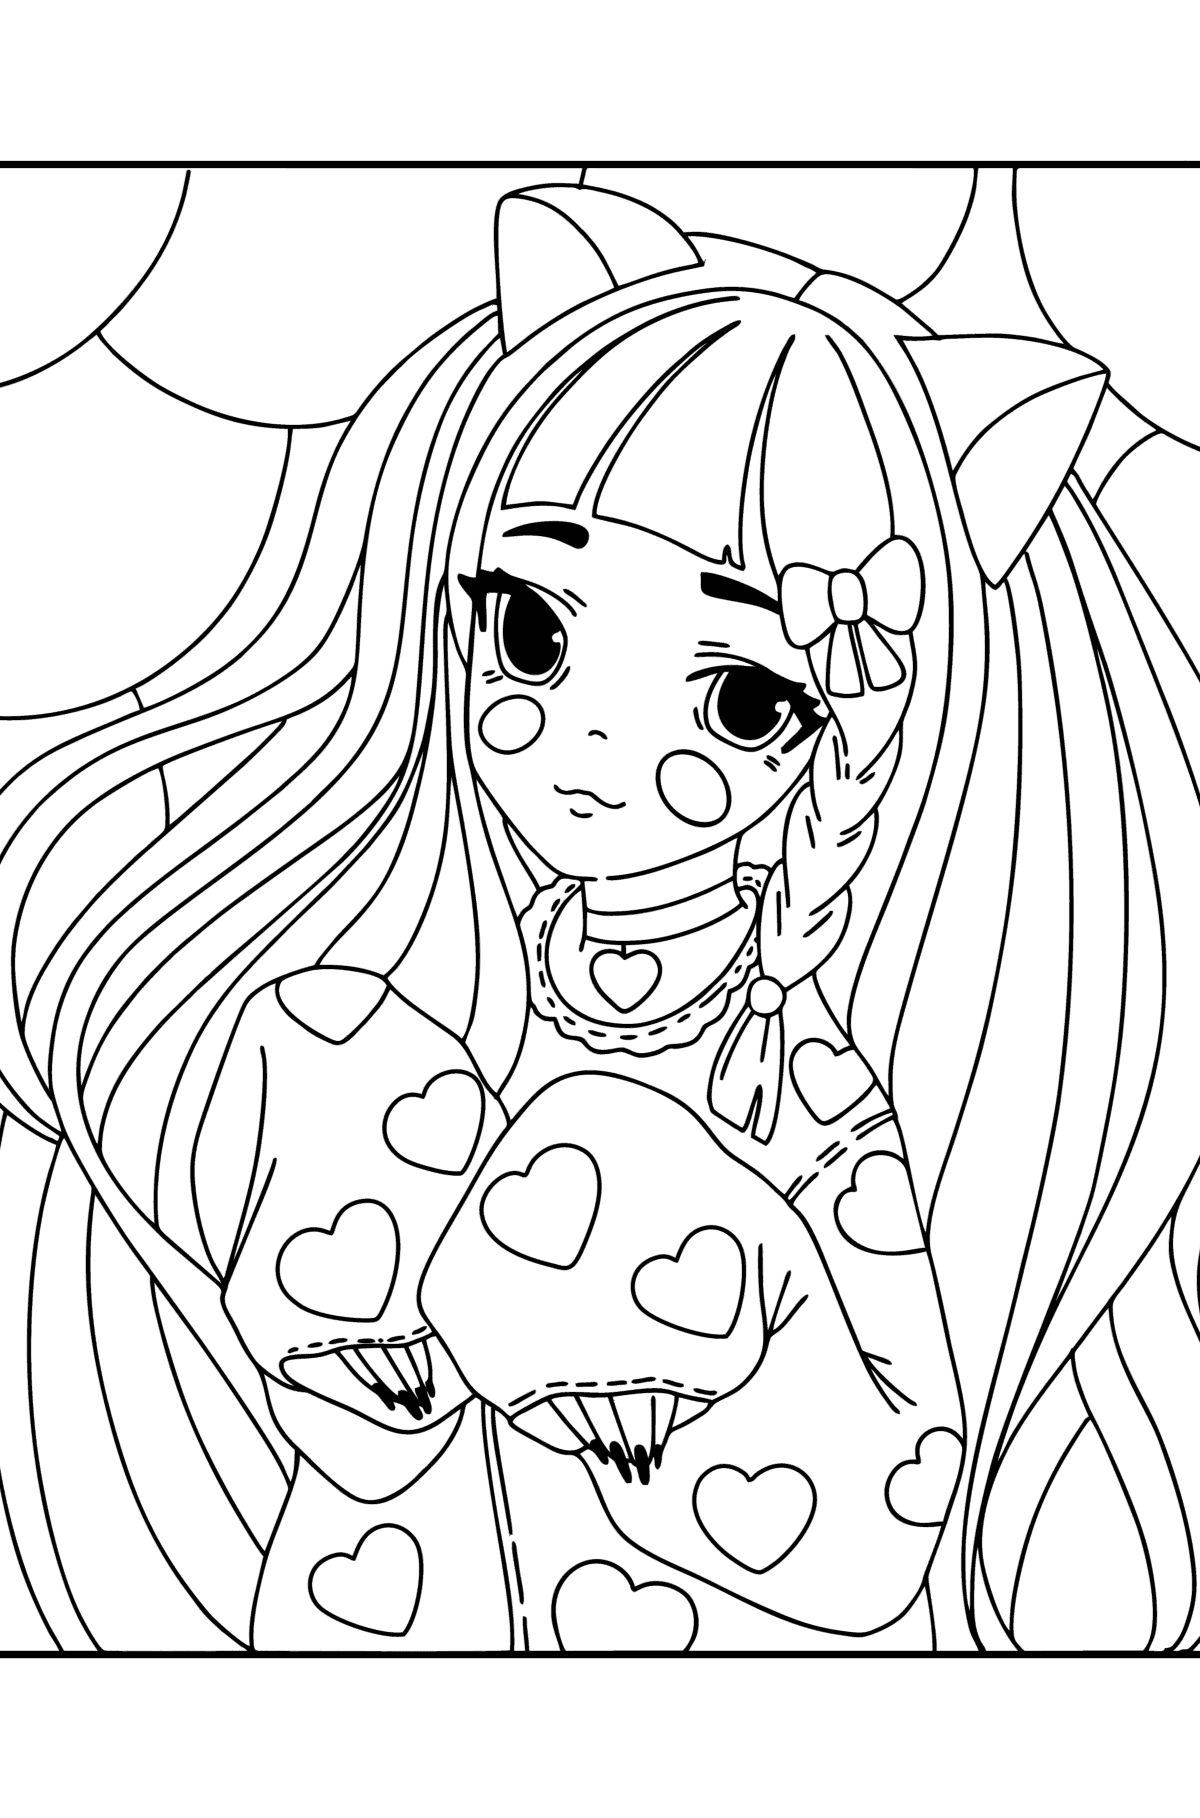 Anime girl with ears and paws coloring page ♥ Online and Print